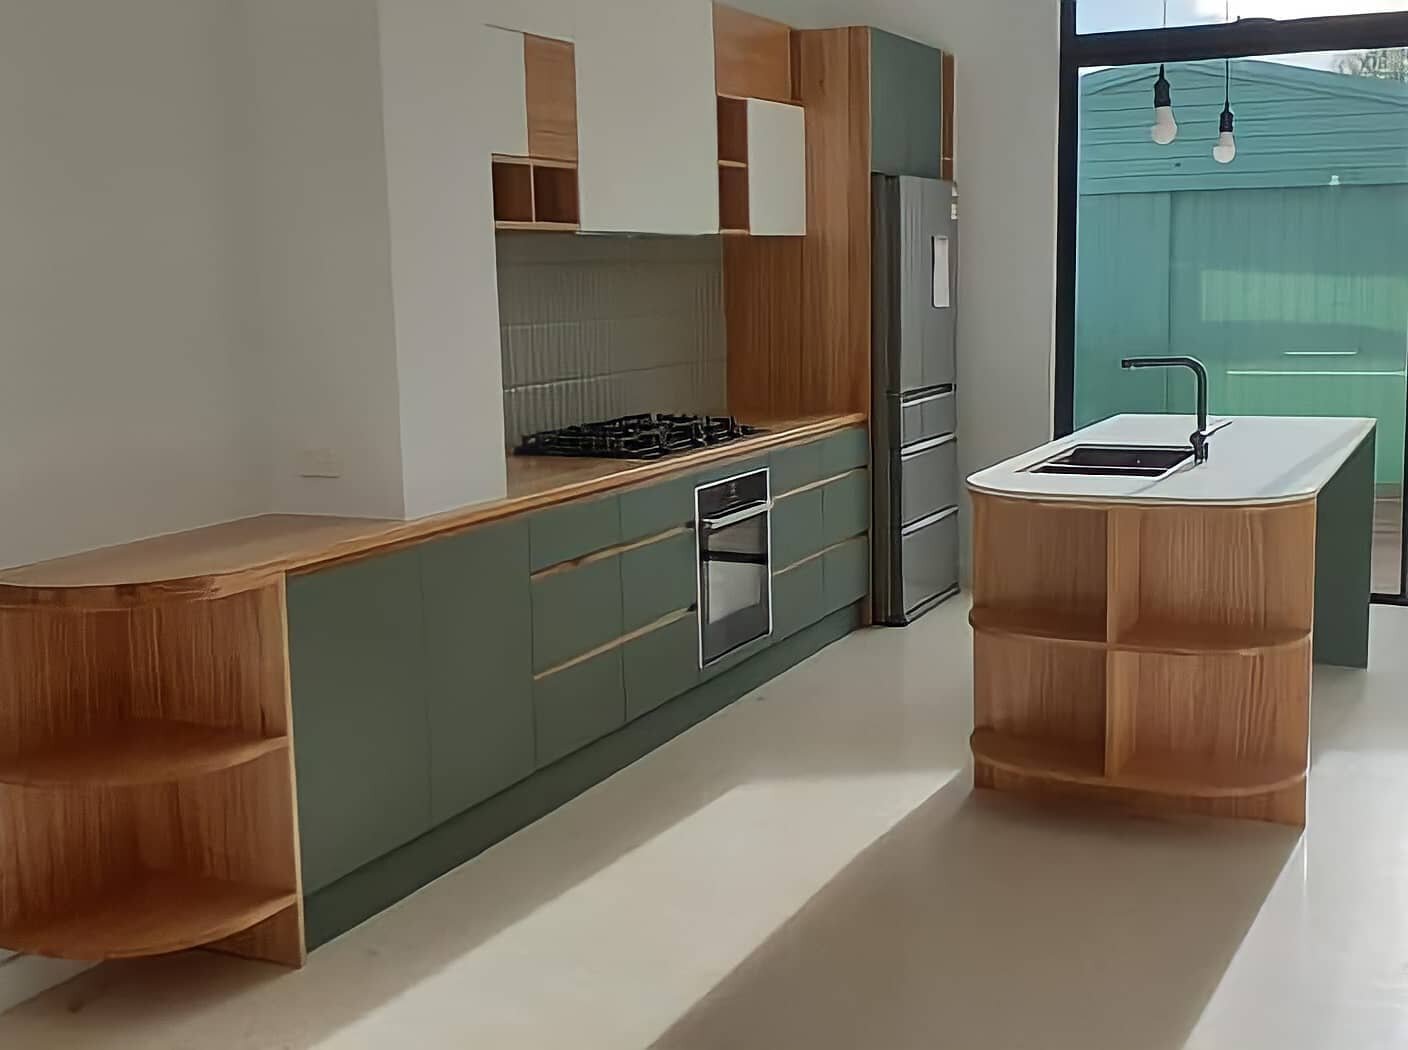 Such a funky kitchen we had the pleasure of working on with @djcabinetmaking &amp; @elmac_homes 🙌